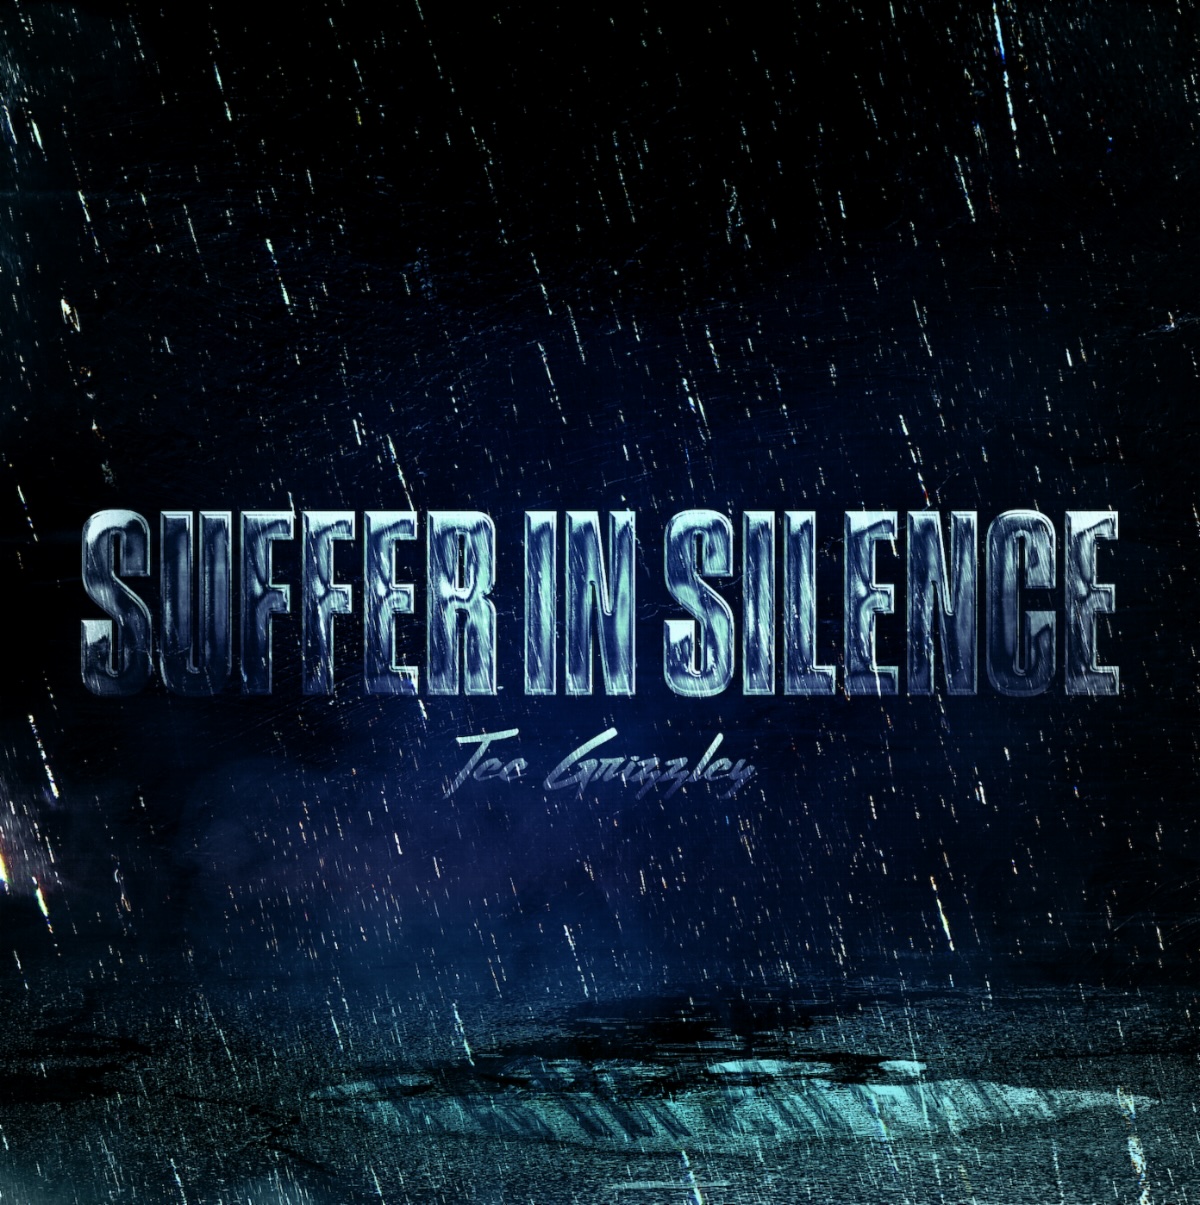 Tee Grizzley Returns With “Suffer In Silence” Single